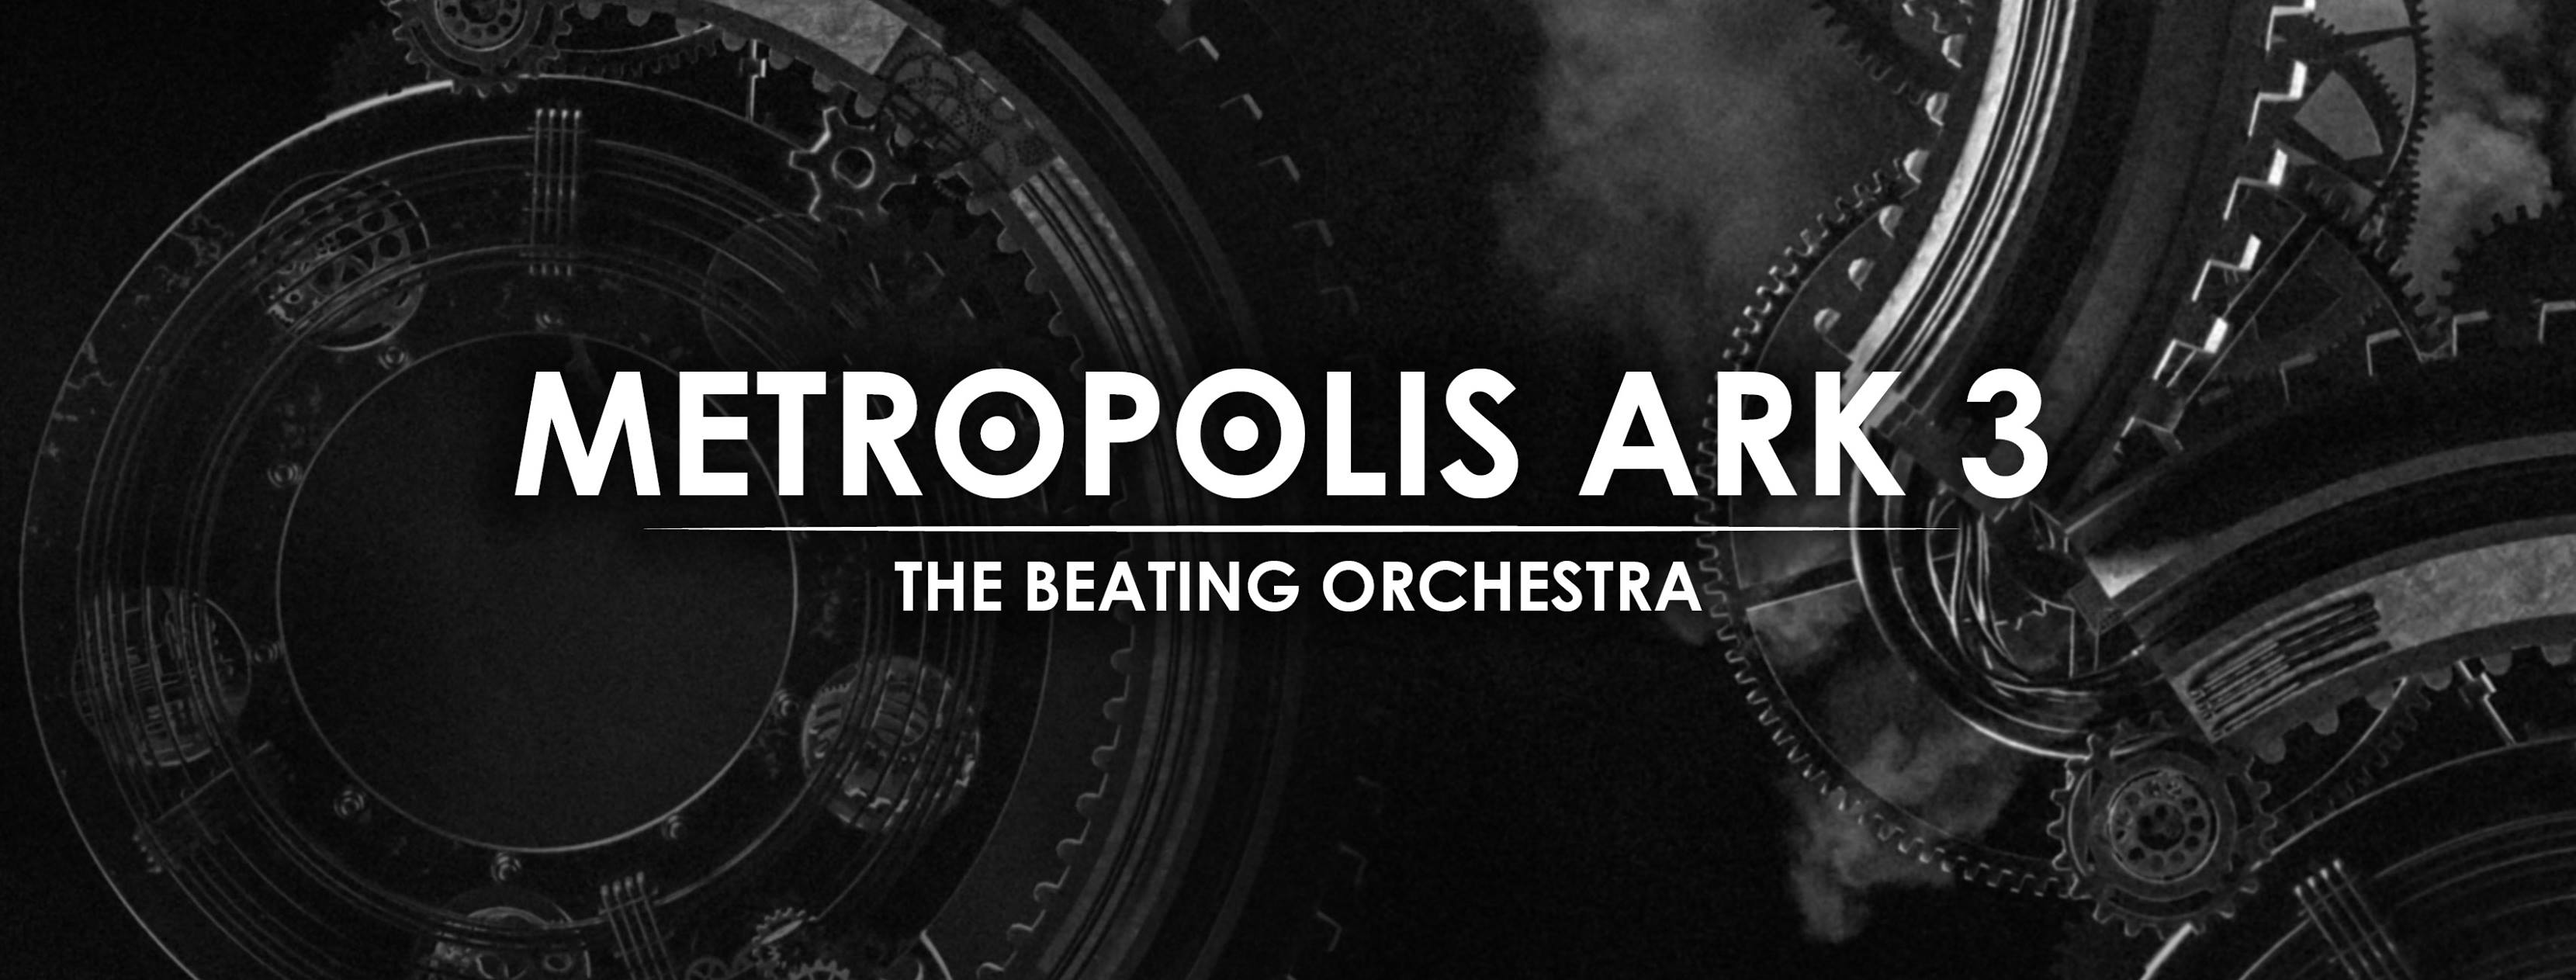 ​METROPOLIS ARK 3 Review - The Beating Orchestra by Orchestral Tools